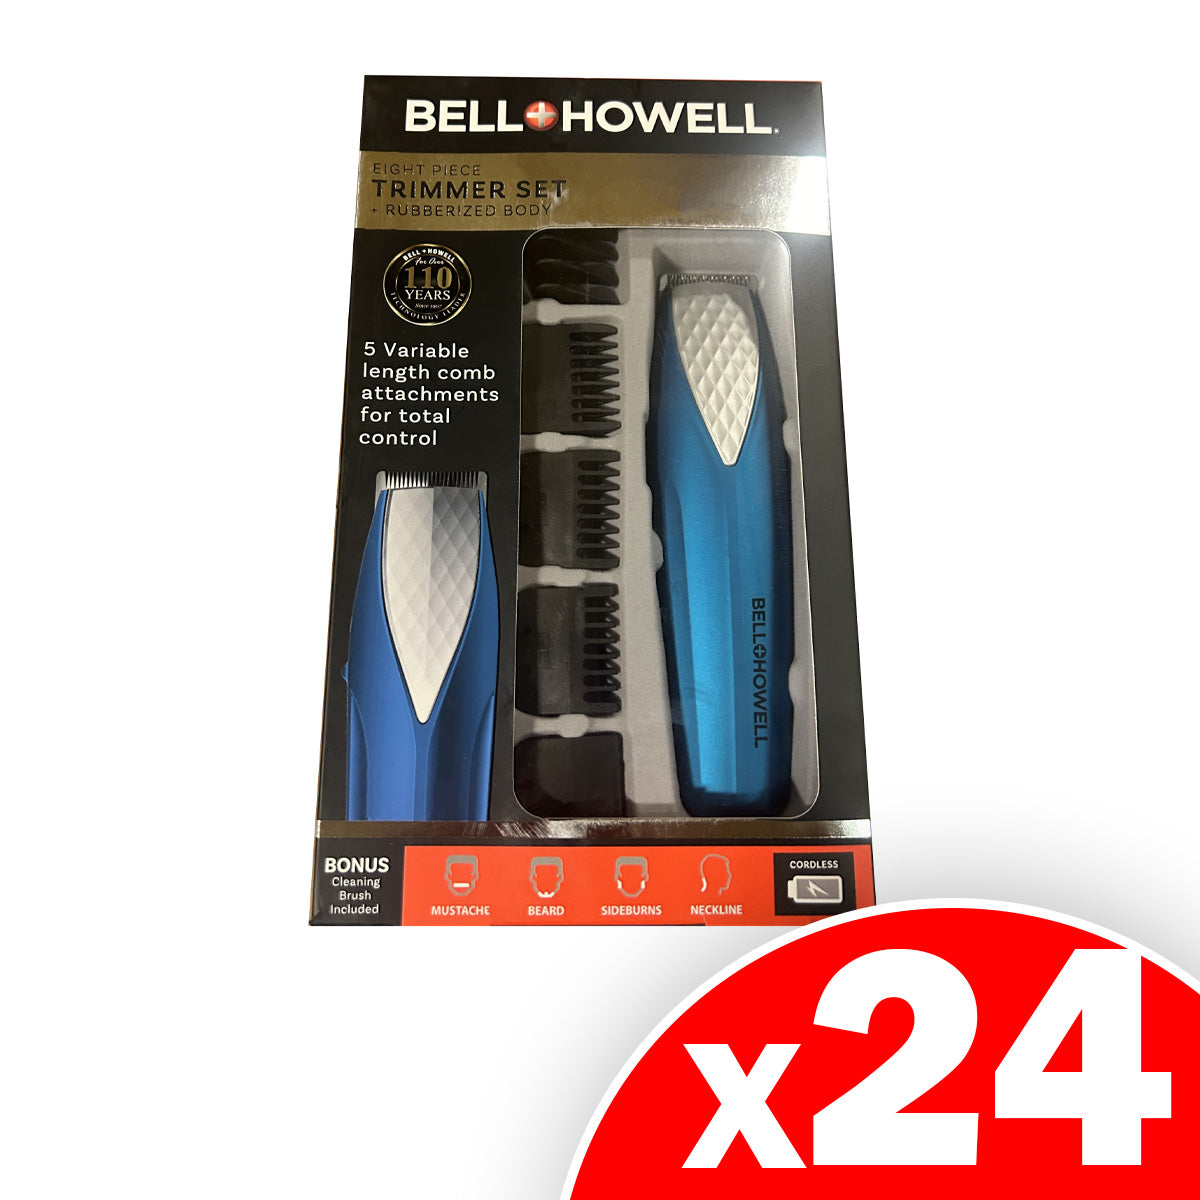 Bell & Howell Eight Piece Cordless Trimmer Set + Rubberized Body (Blue), 24 Pack